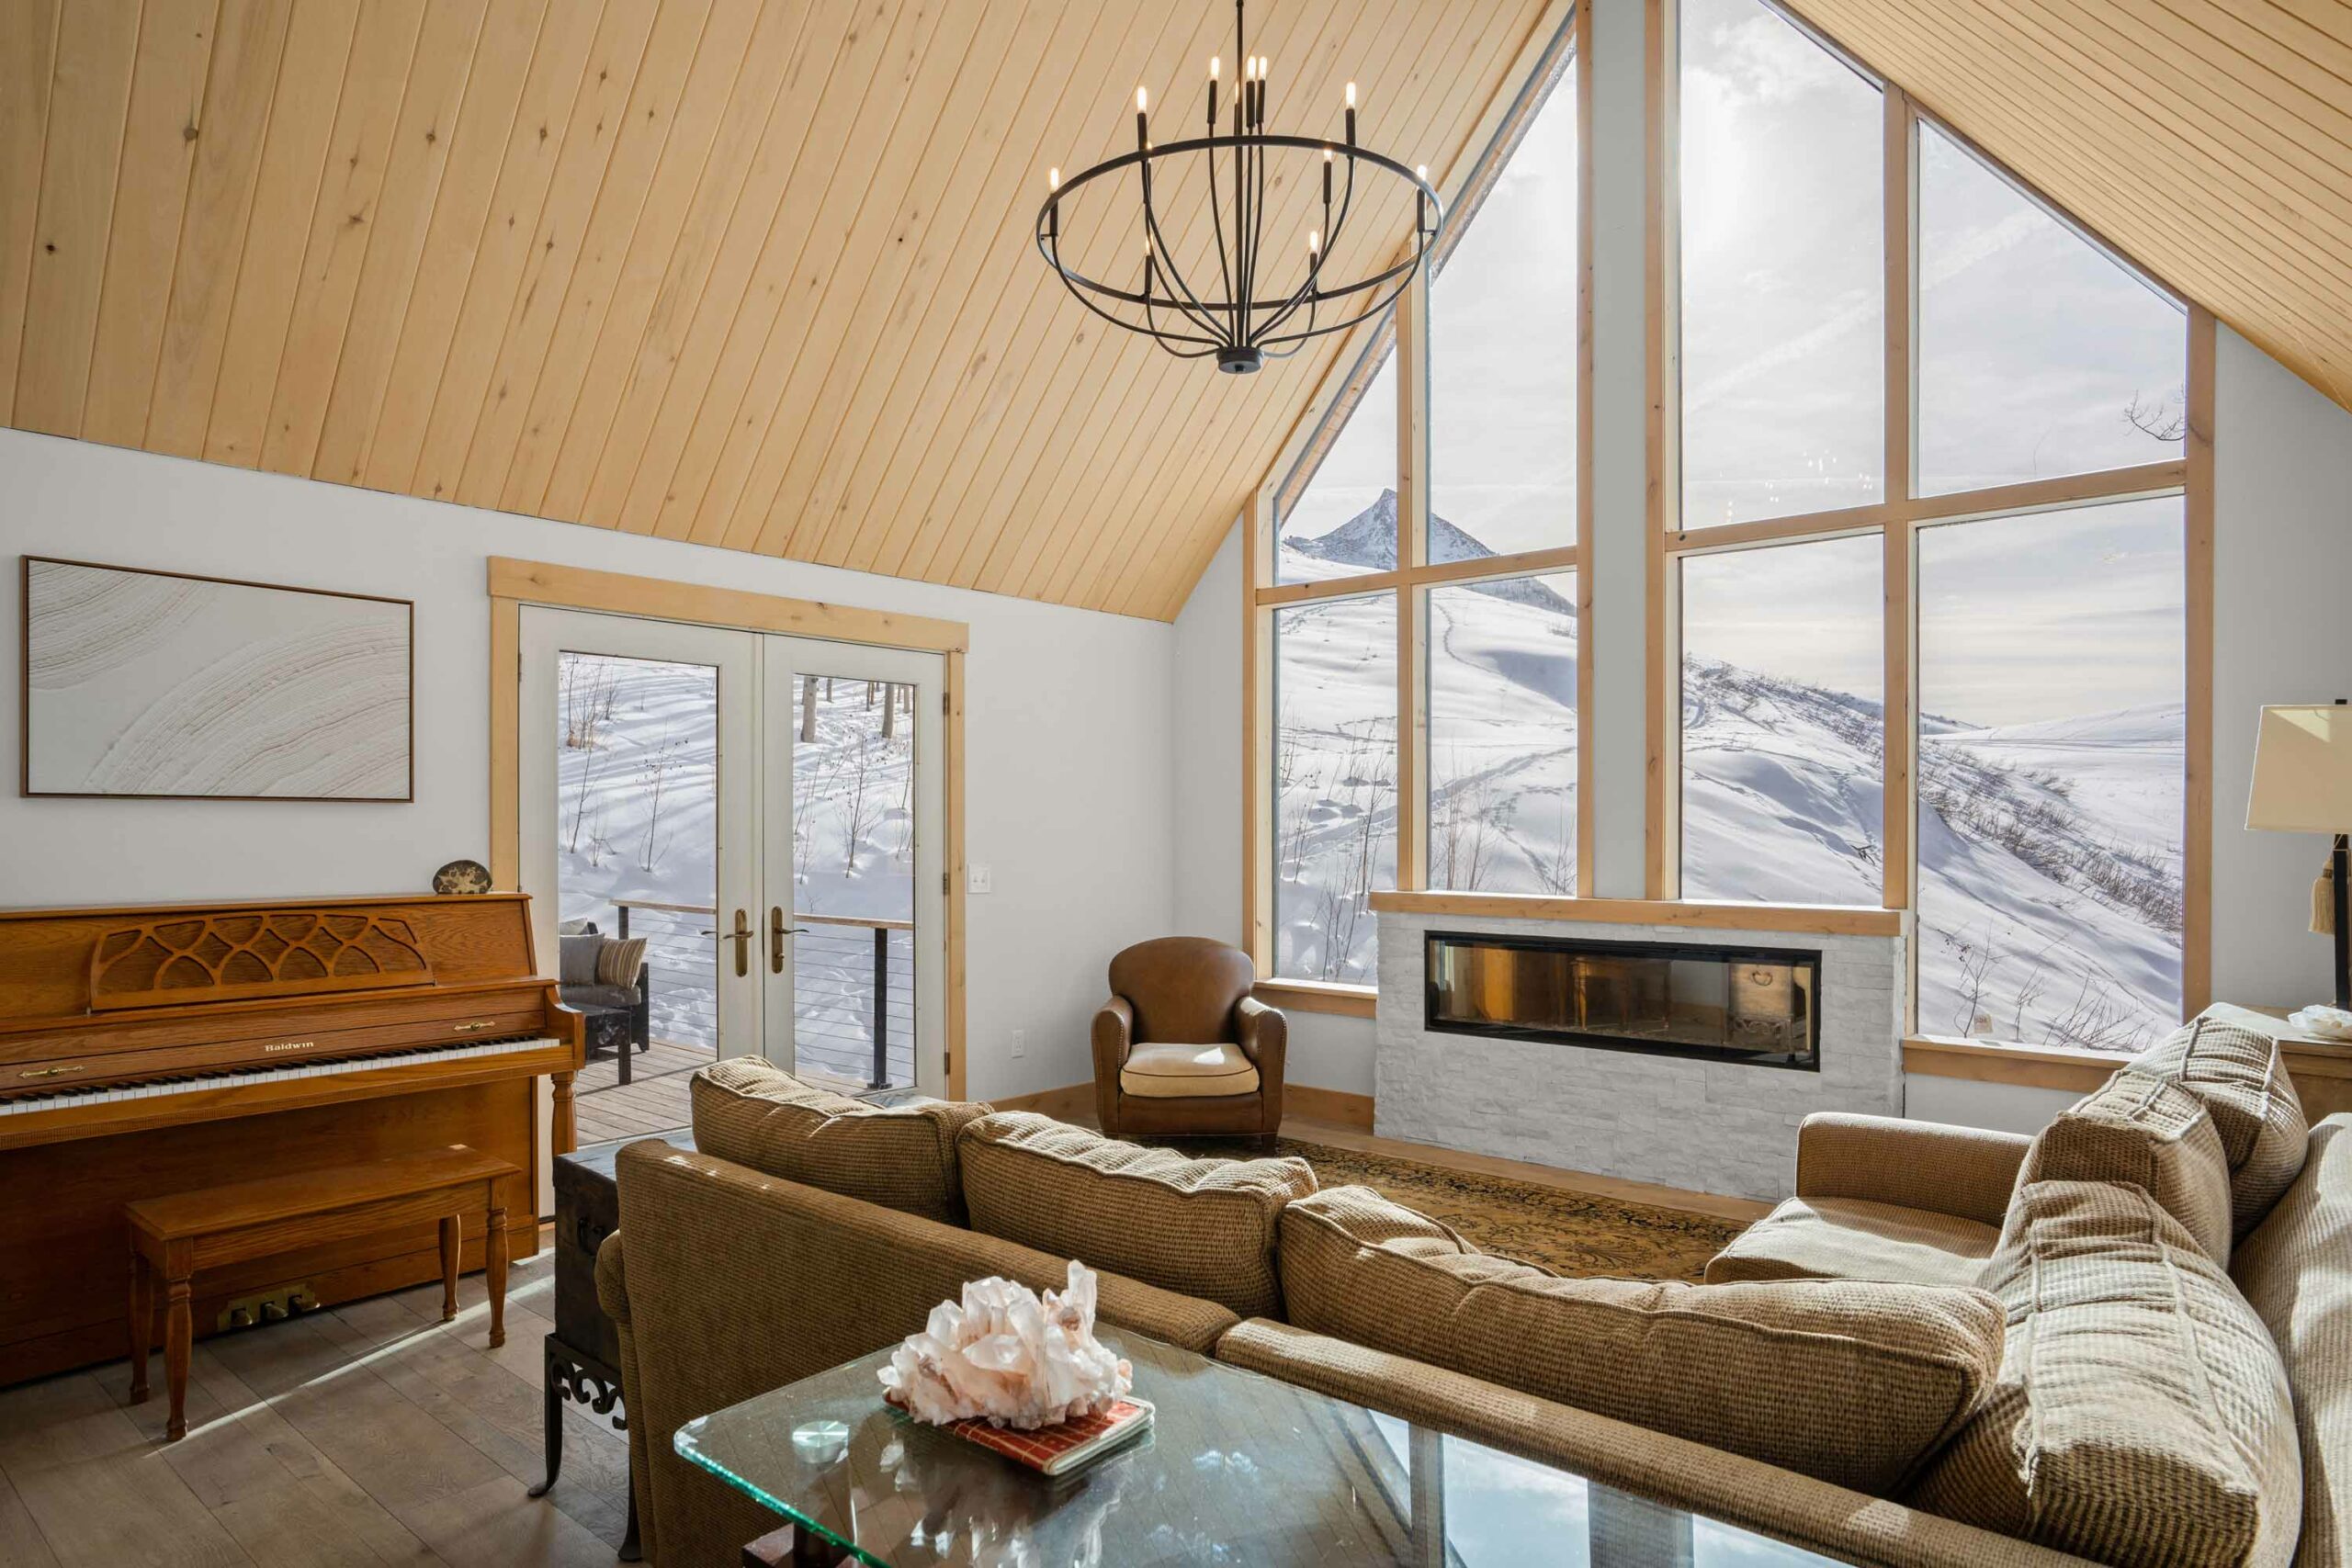 42 Ruby Drive Mt. Crested Butte, Colorado - living room views